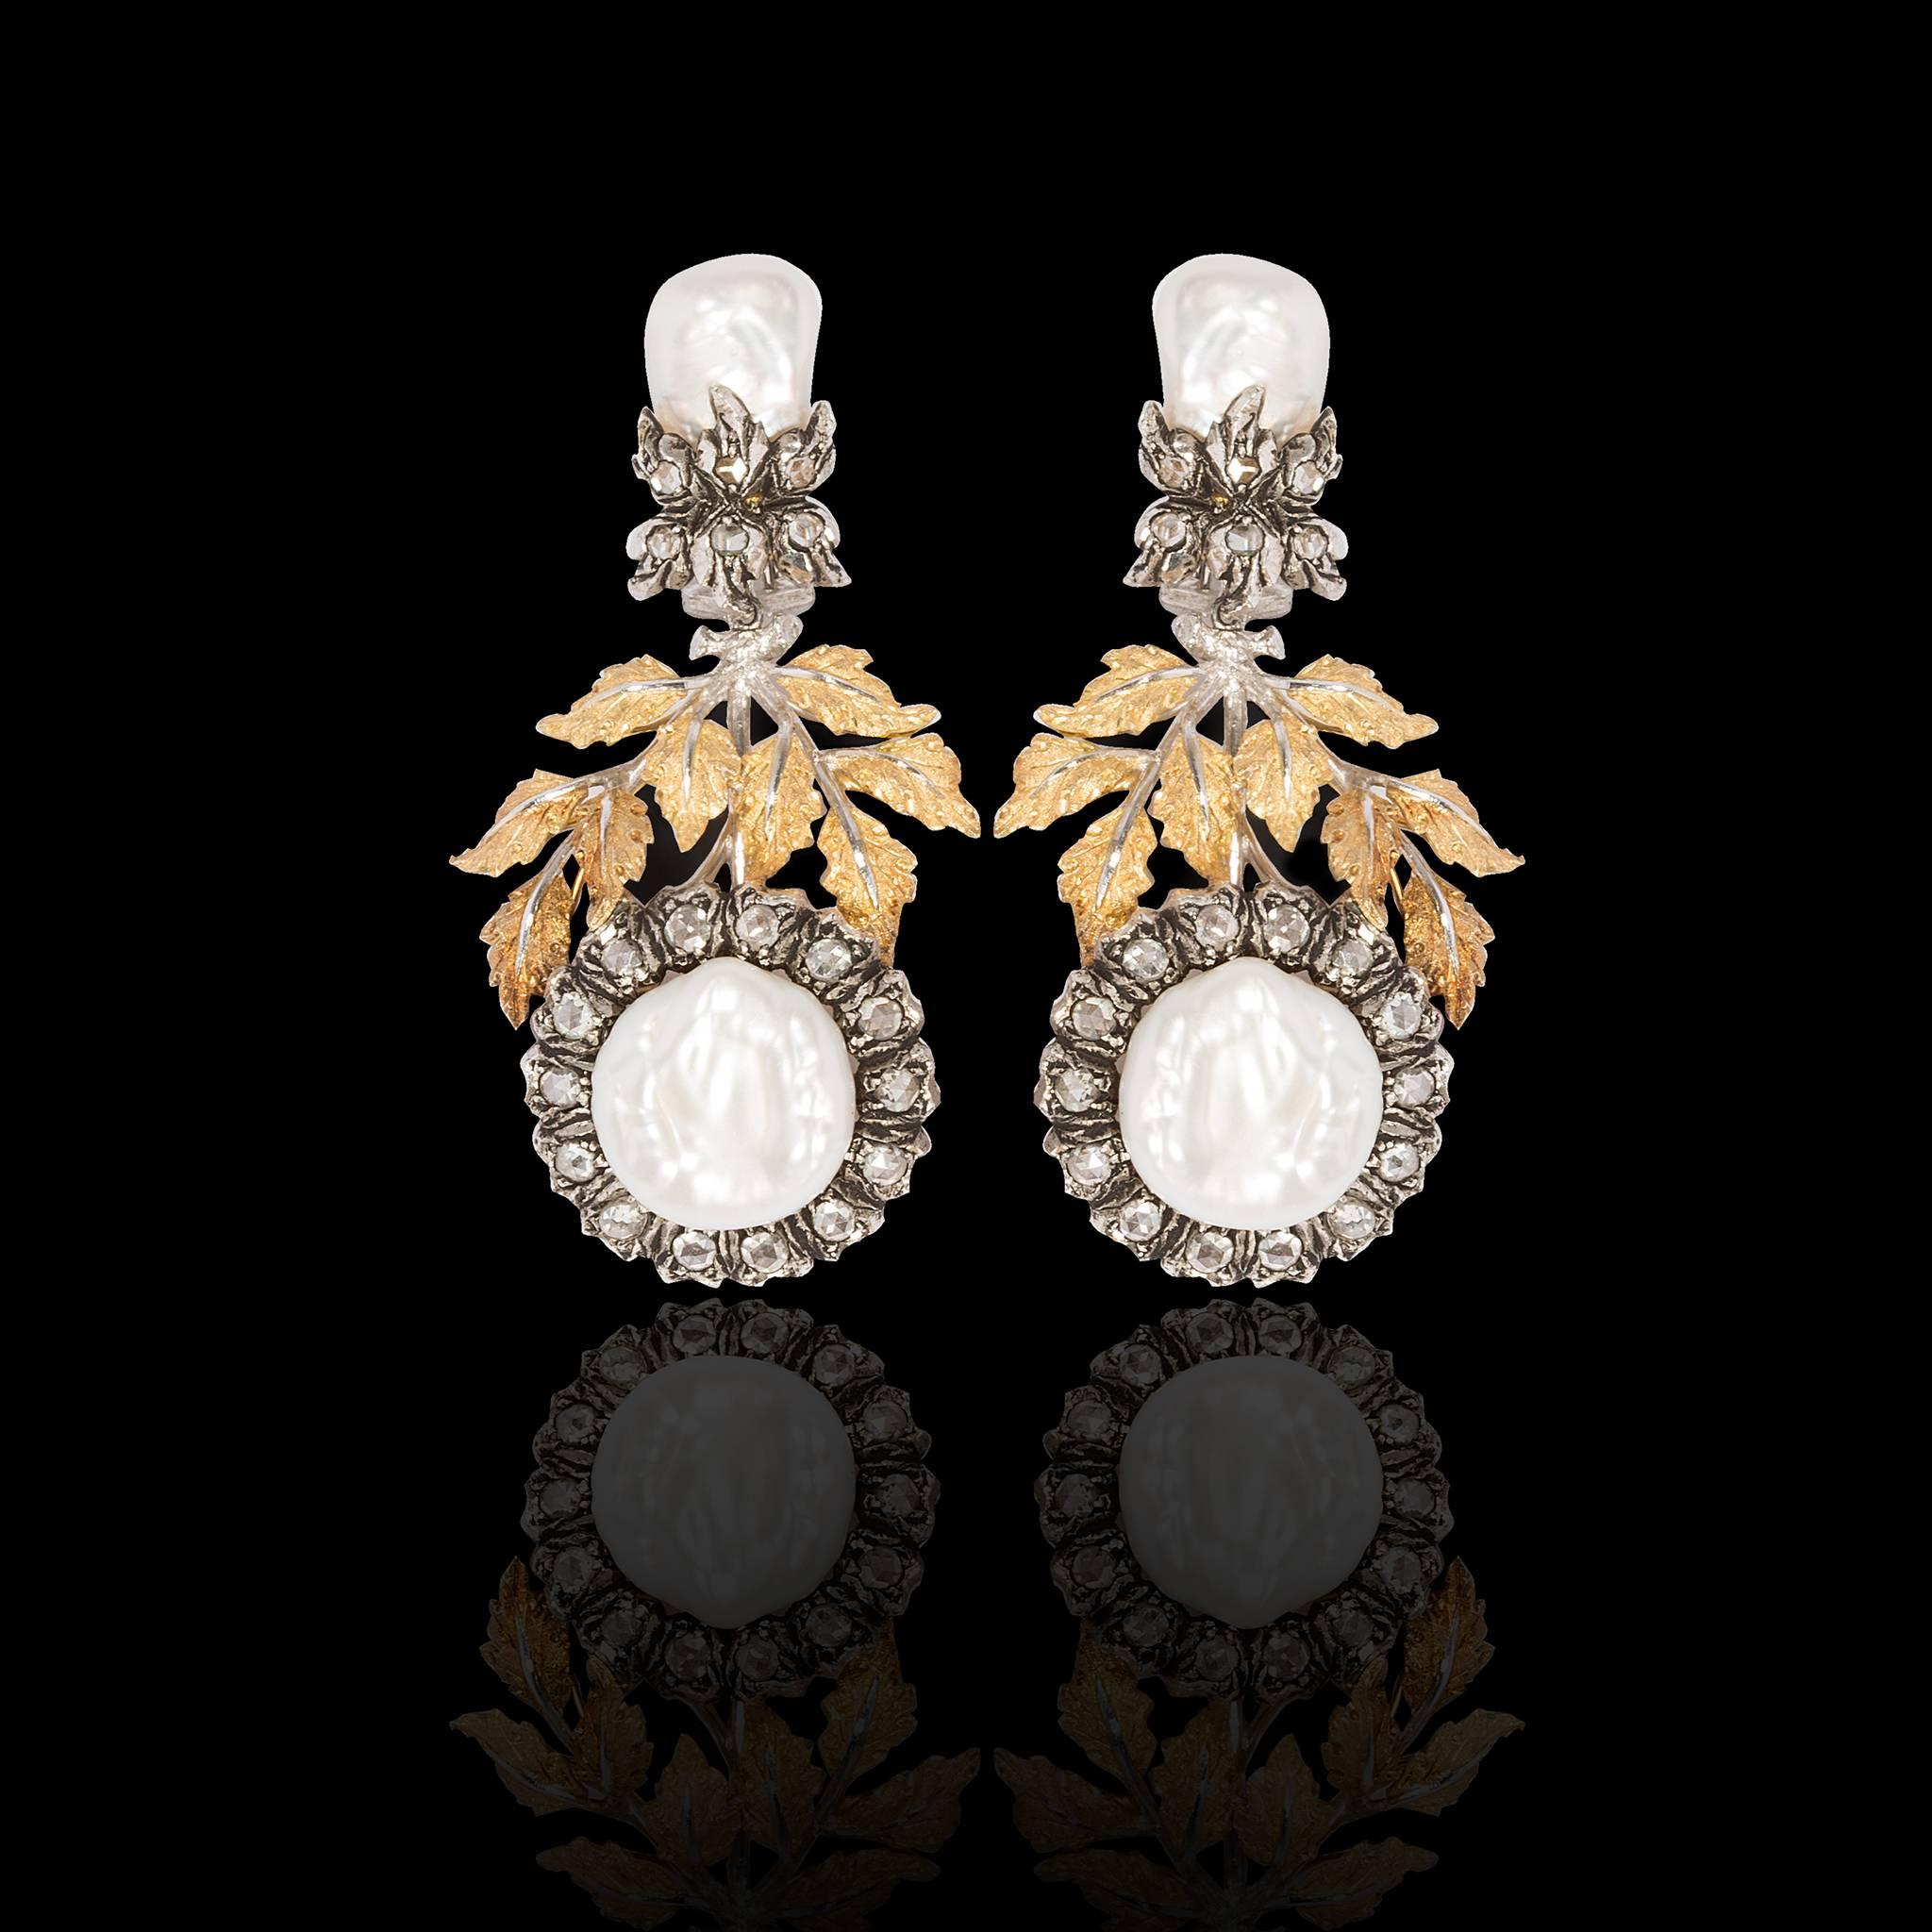 -Buccellati (Italien jeweller since 1919)pendant earrings in 18 carats gold ,baroque pearls and mother -of- pearl earrings.
-Gold:18 carats .
-Diamonds:40 rose-cut diamonds .
-Earpierce clip fitting.
-Signed :Gianmaria Buccellati ITALY.
-Numbered